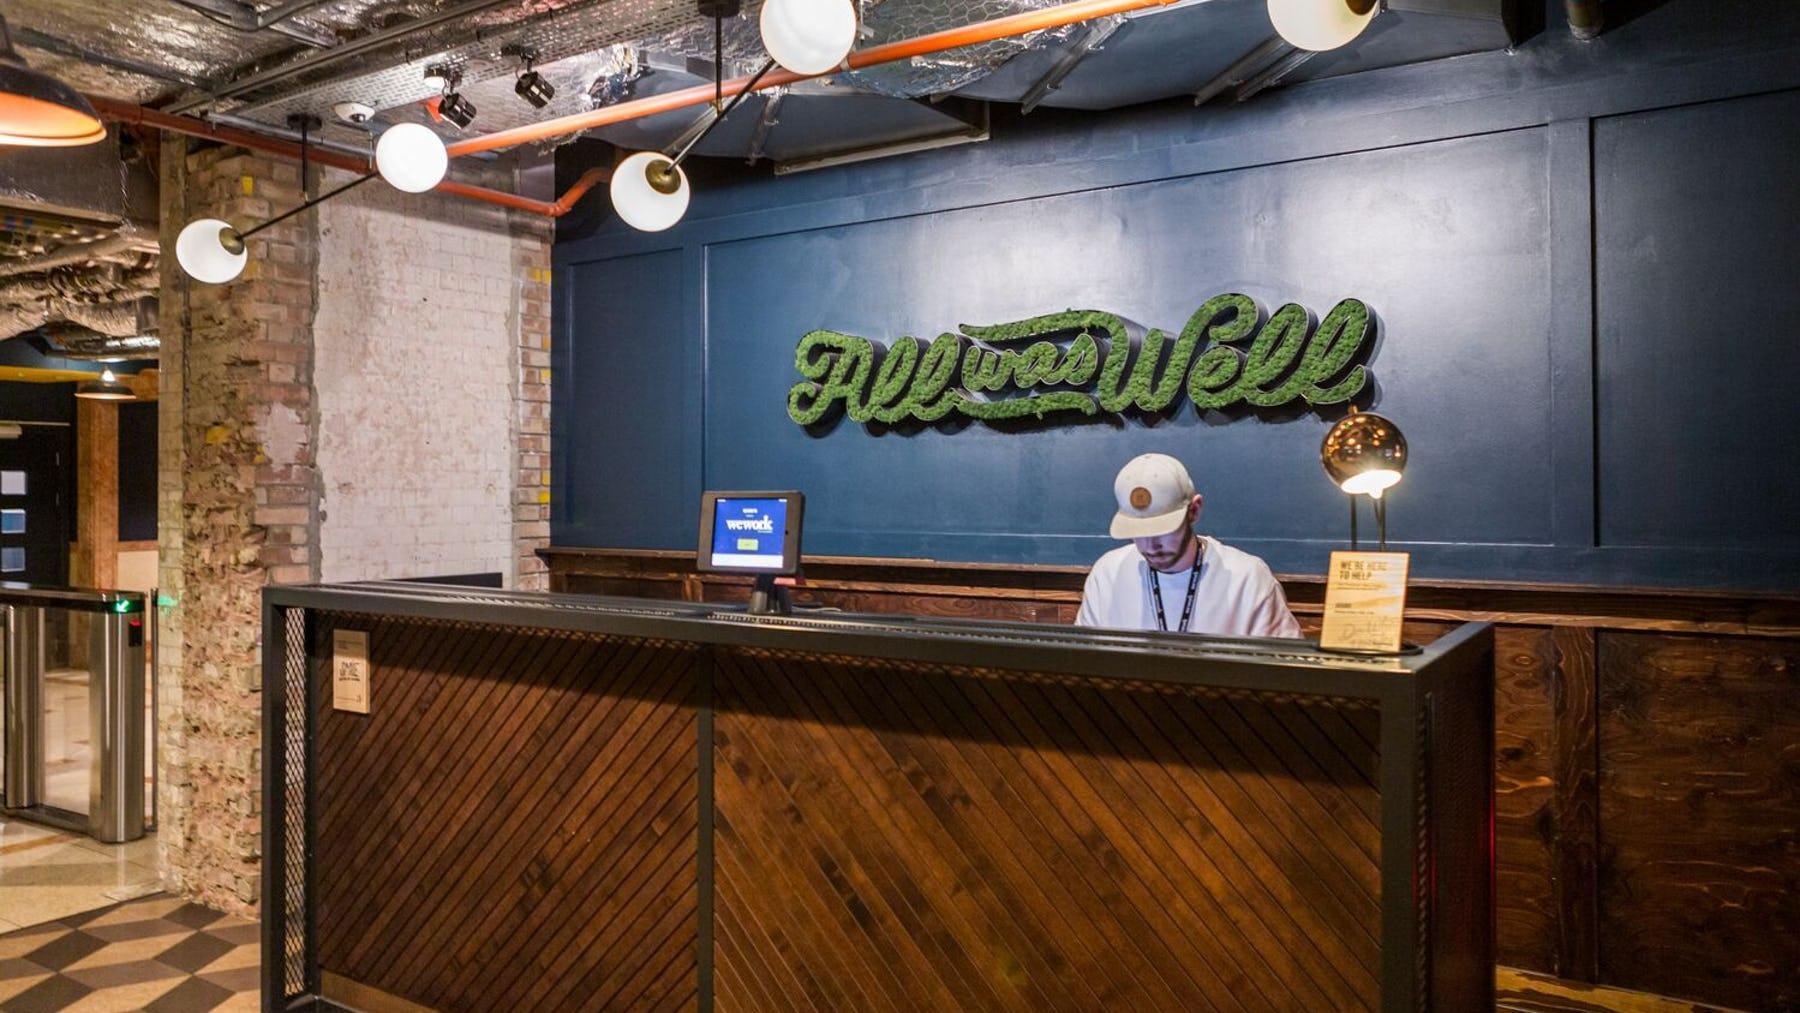 WeWork 3 Waterhouse Square beltere